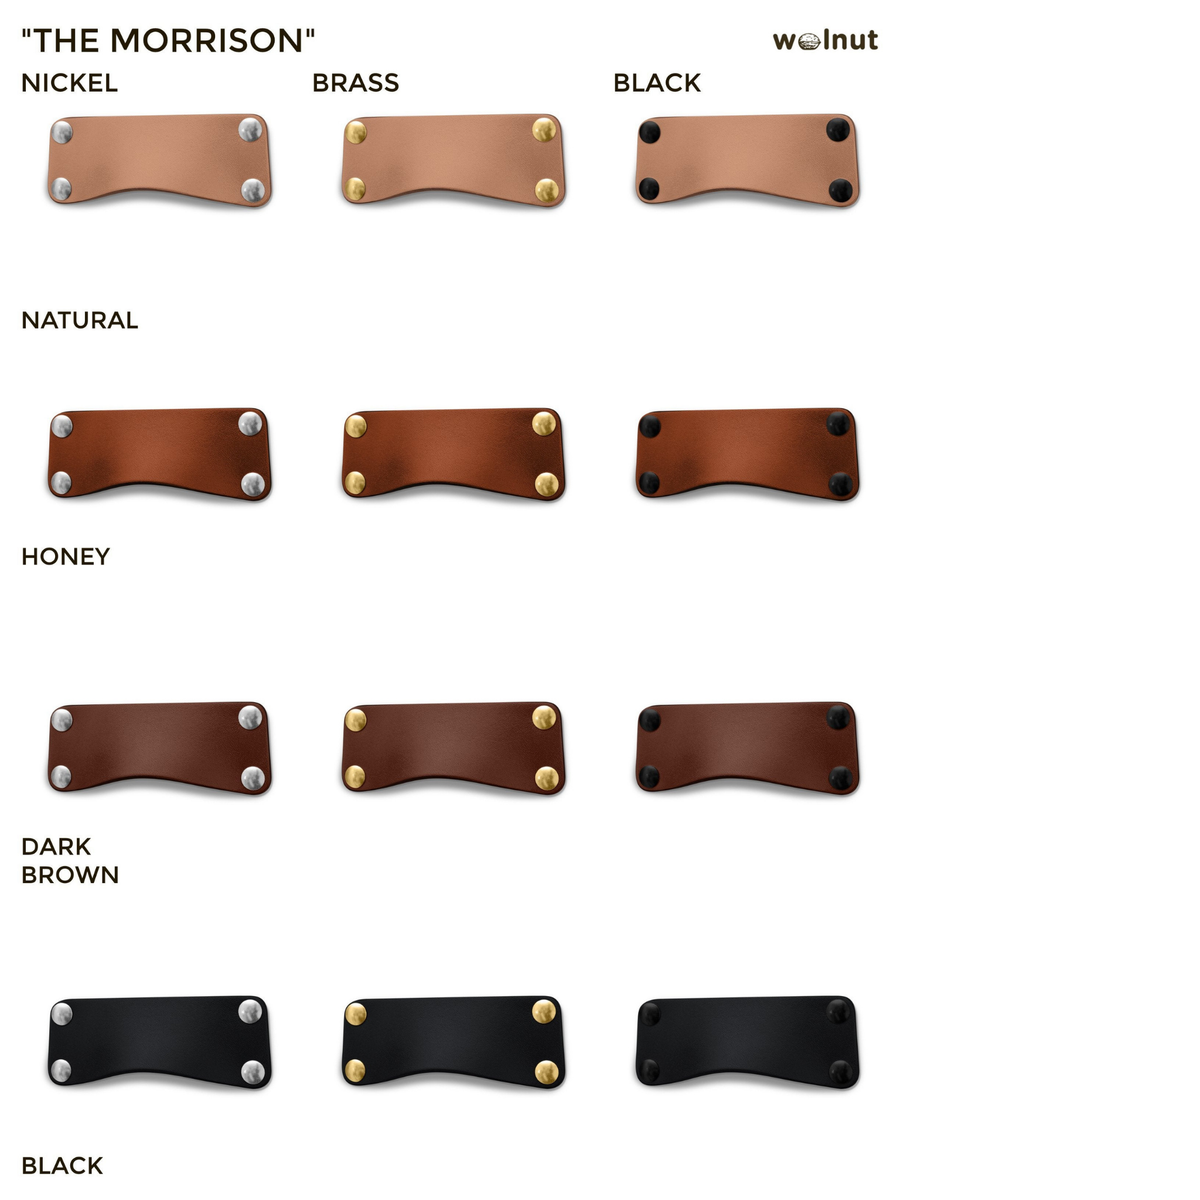 Photo collage showing all variants of the Morrison leather bin pull, in four leather colors (Natural, Honey, Dark Brown, Black), and three metal finishes for hardware (Nickel, Brass, Black Matte)